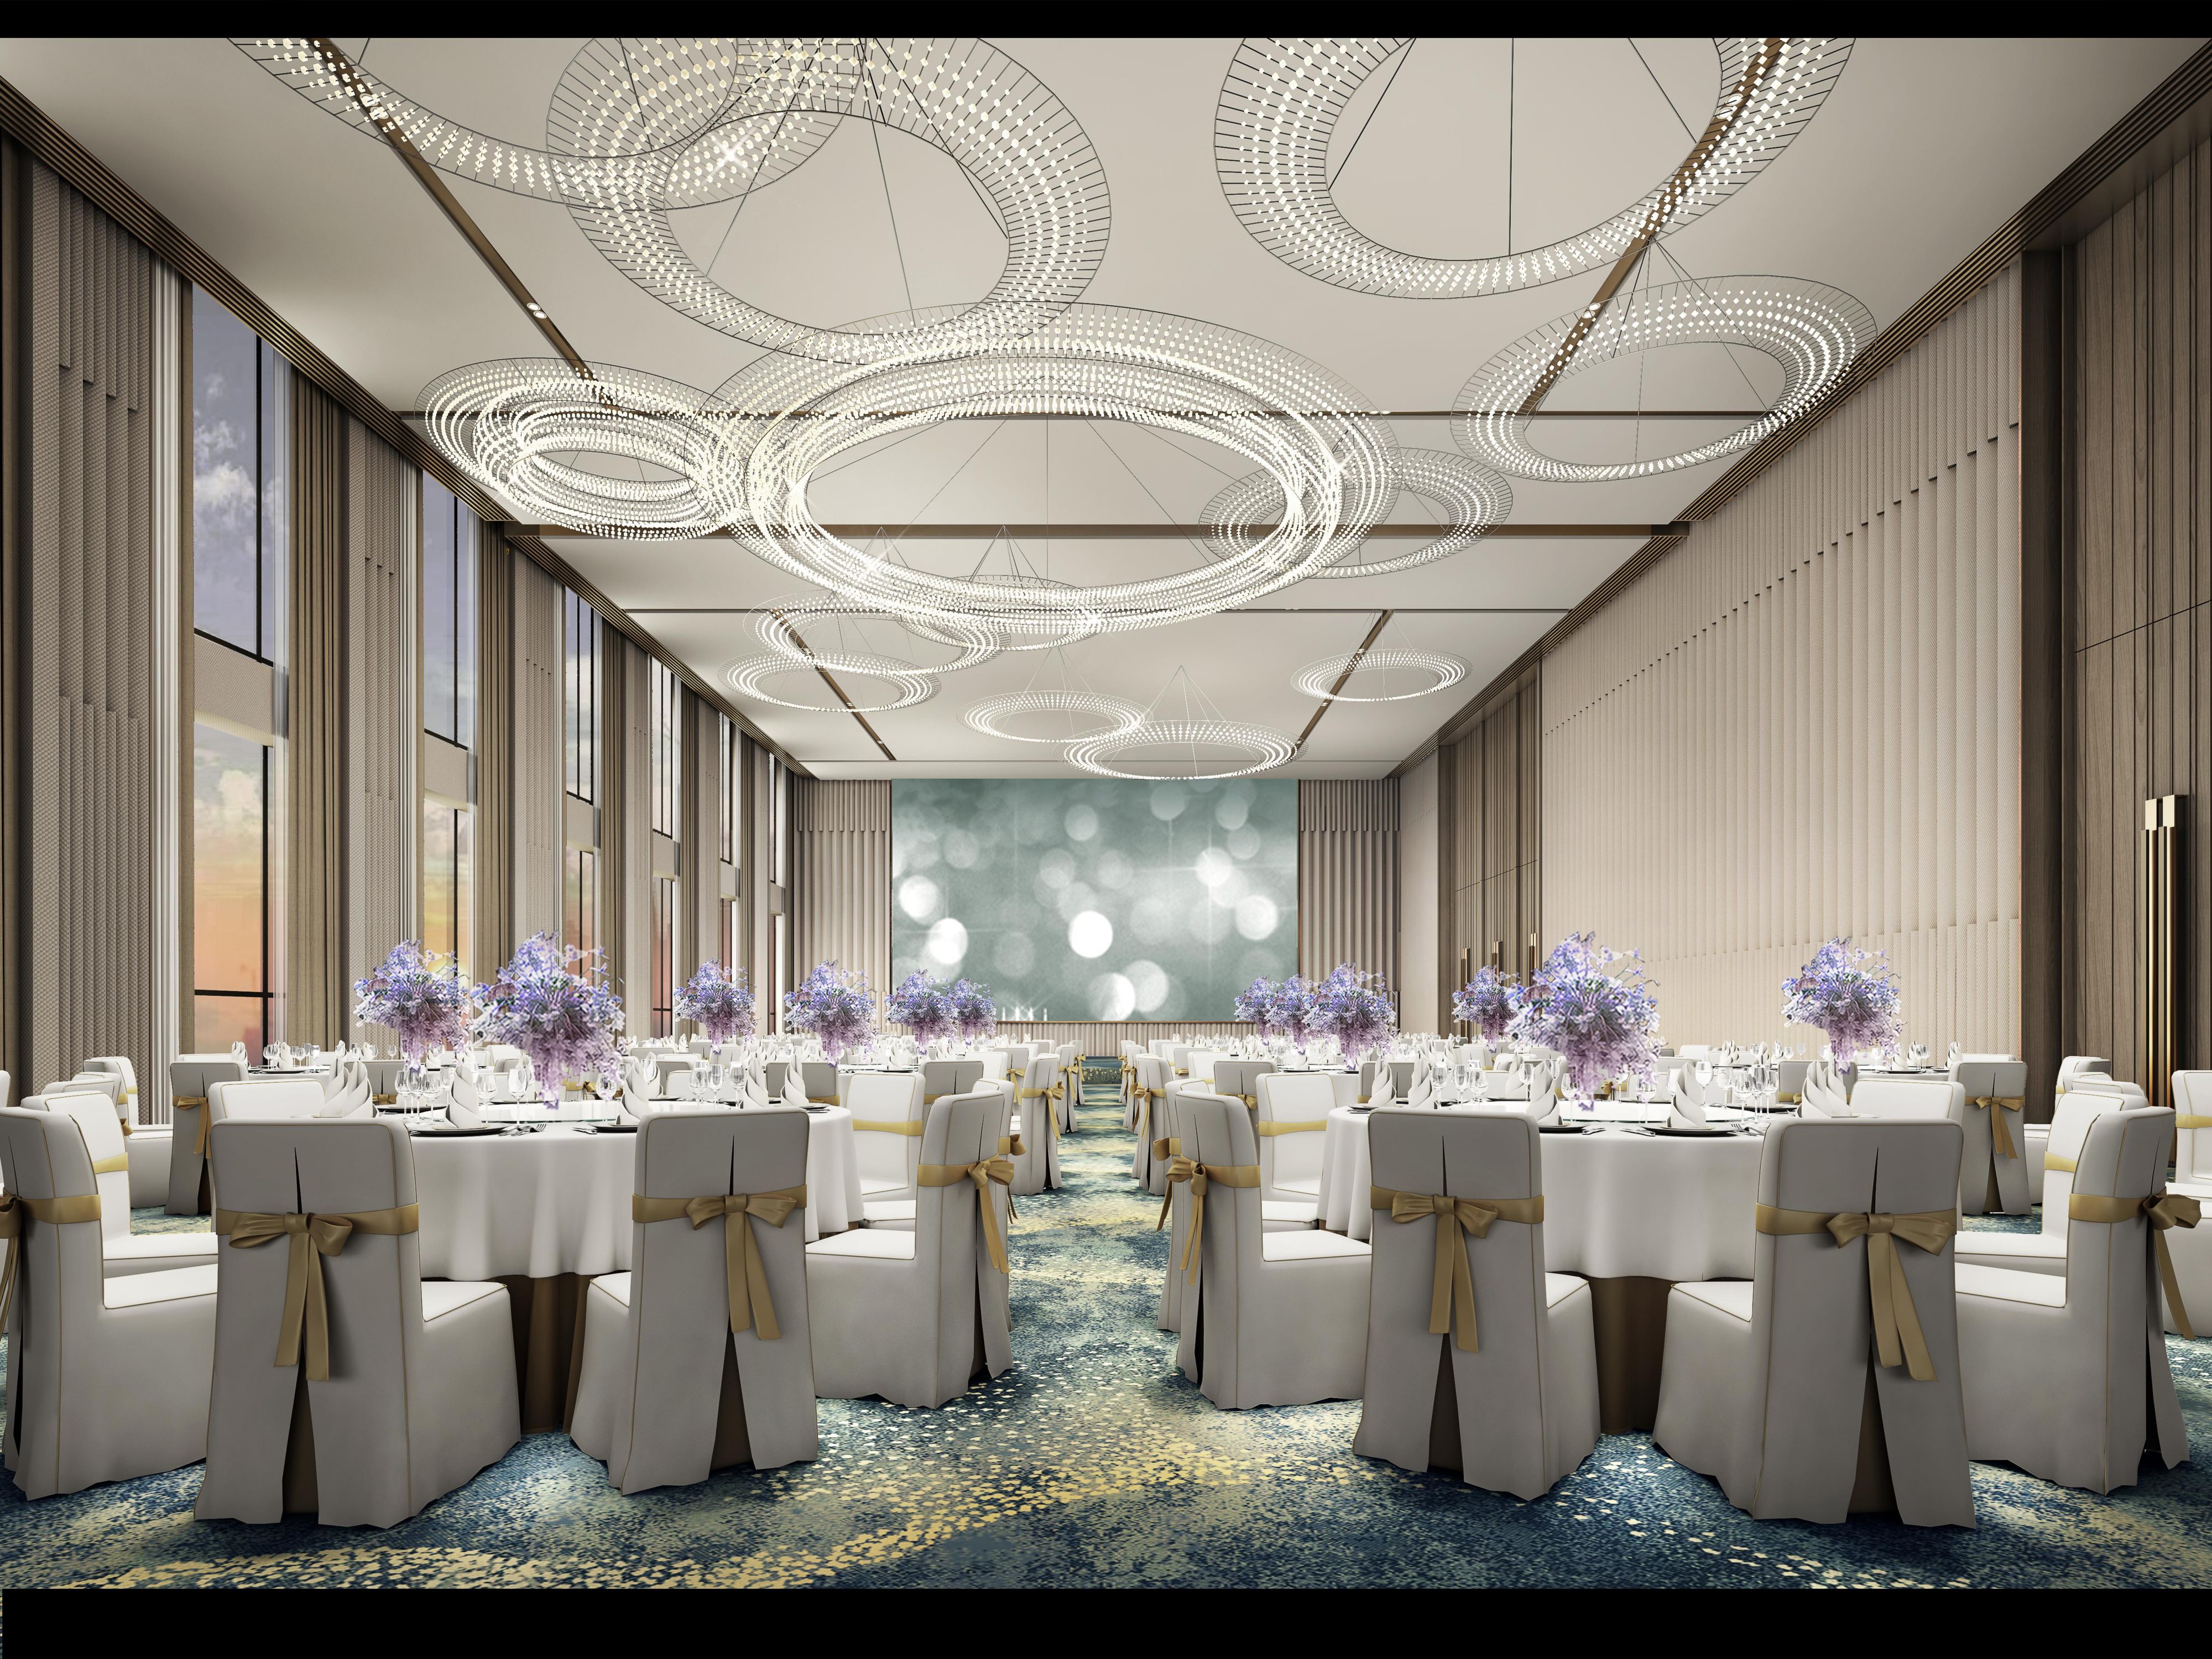 The 538-square-meter Ballroom, featuring a pleasant view of the natural garden, can accommodate 500 people for cocktails. All meeting rooms are equipped with advanced multimedia audio-visual systems.